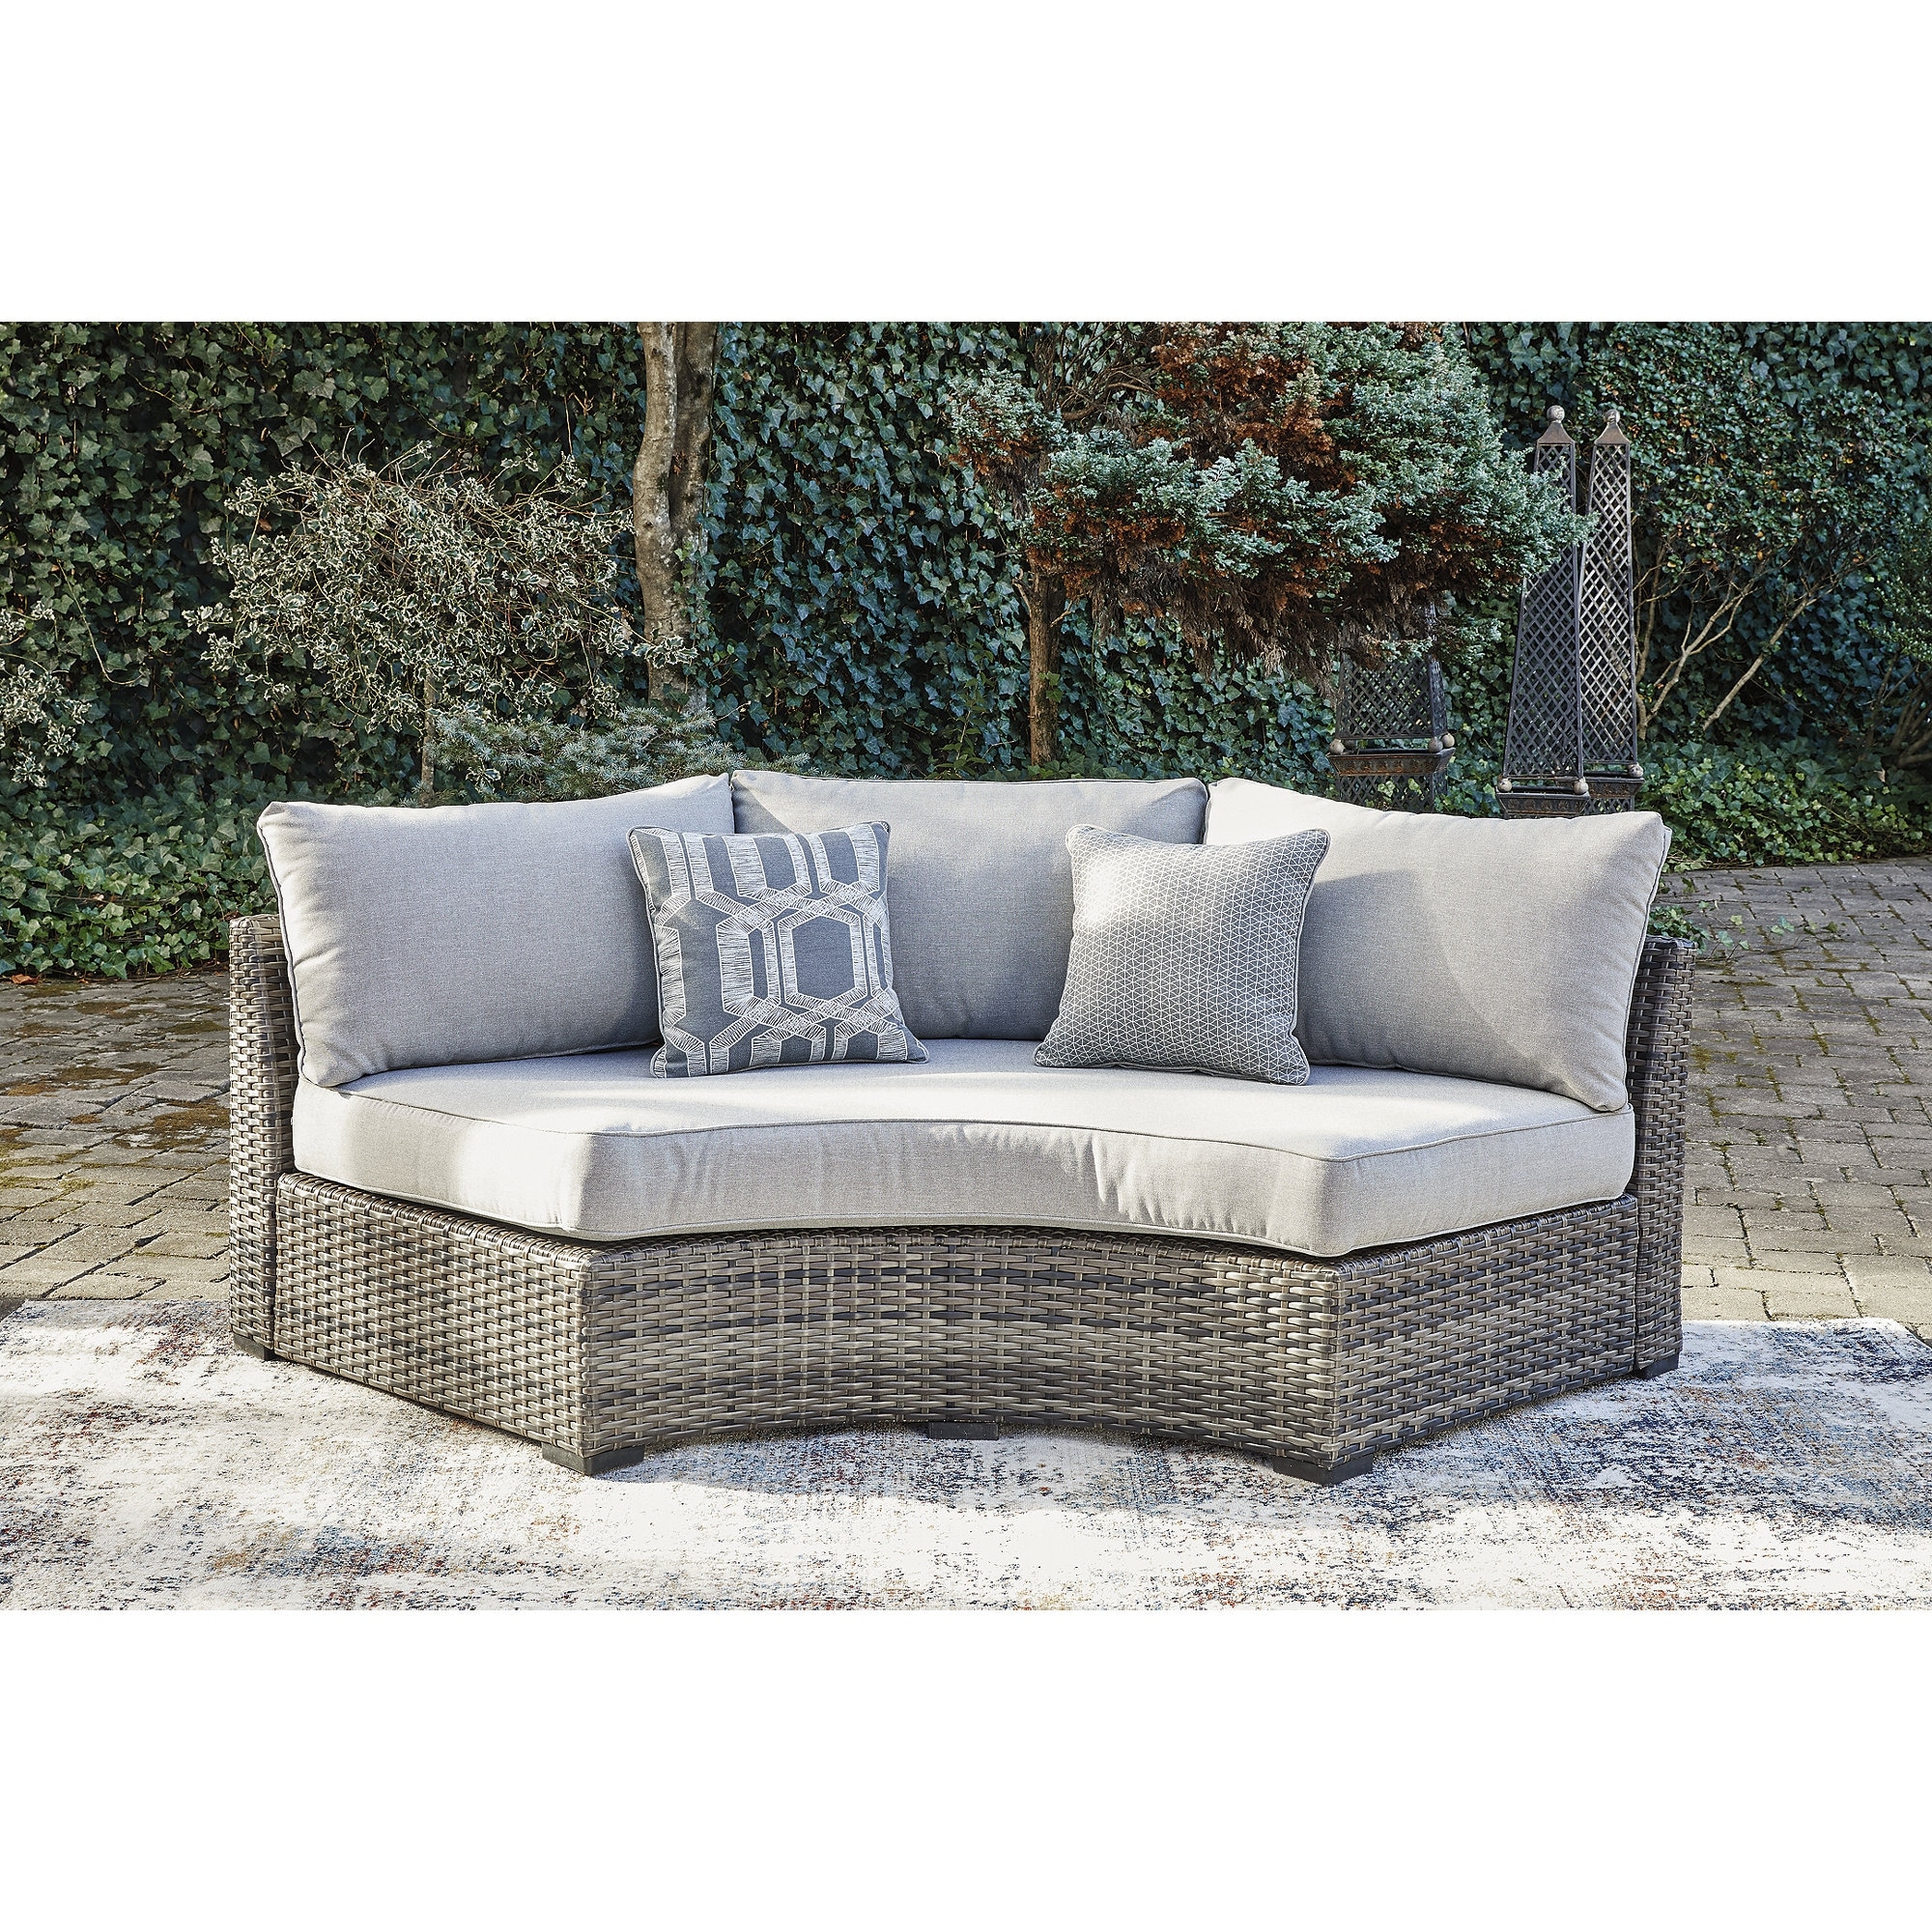 Signature Design By Ashley Harbor Court Hand-woven Wicker-look Curved Loveseat - 86w X 42d X 34h